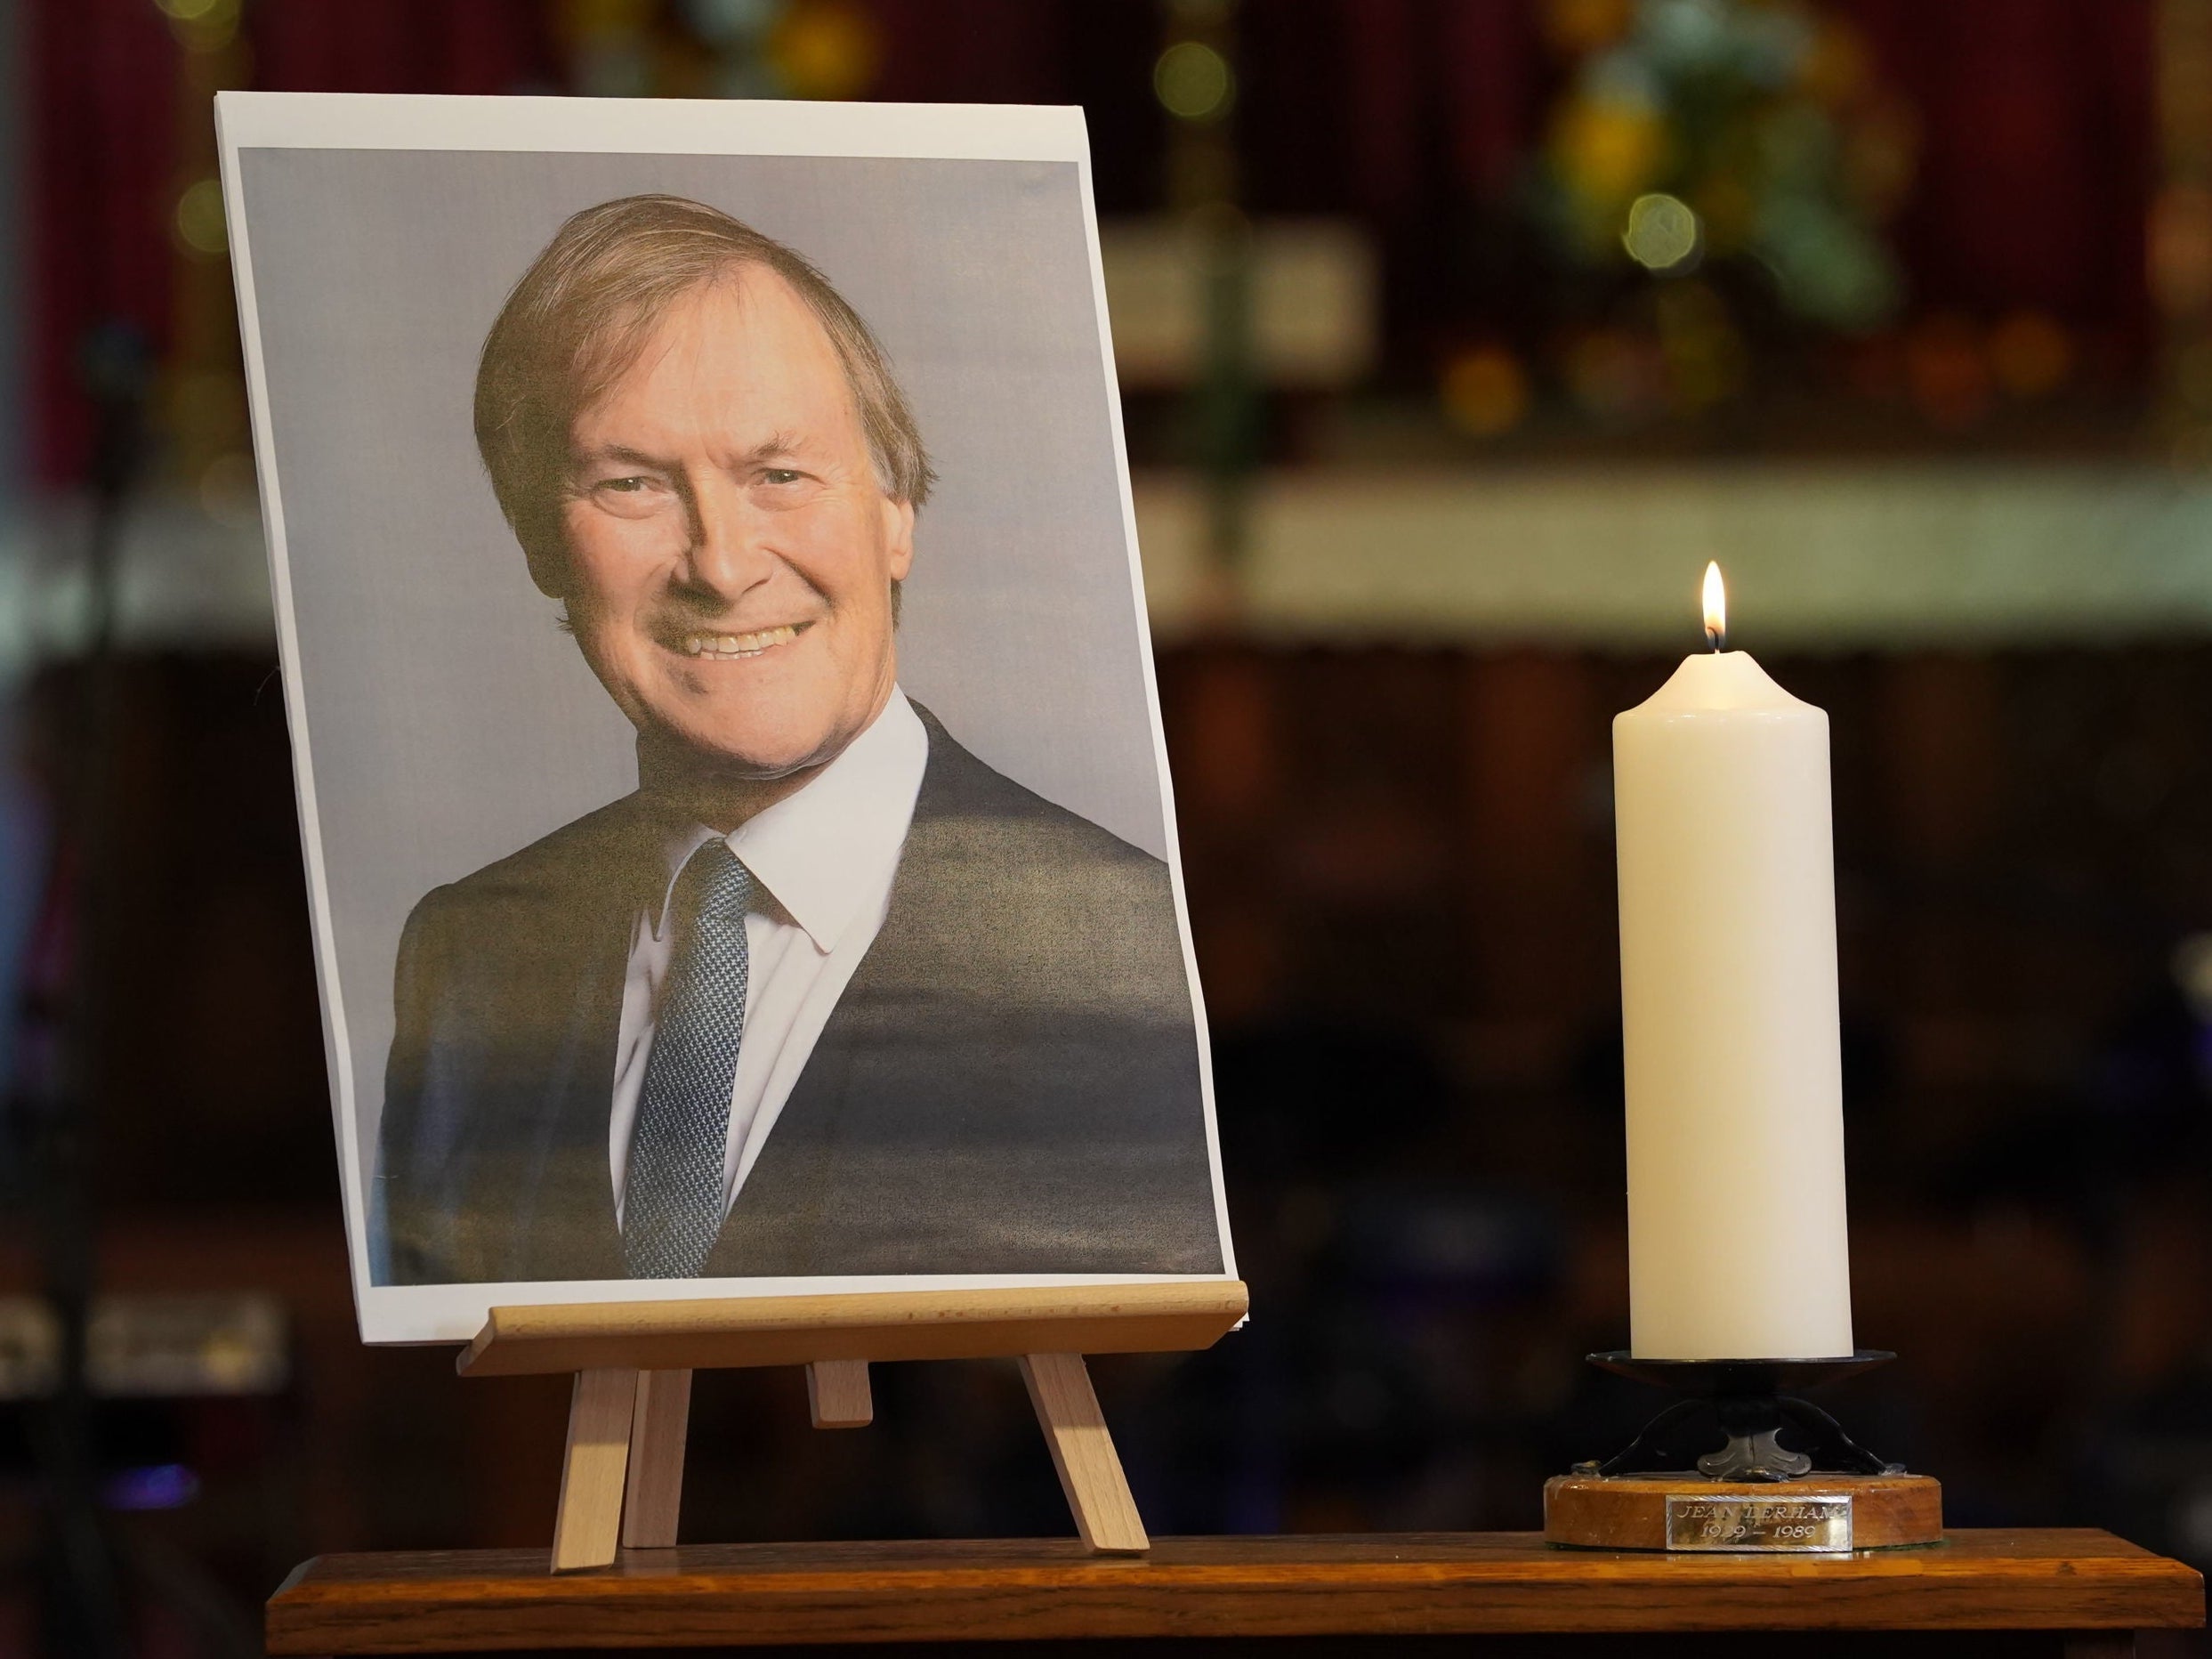 Sir David Amess was stabbed to death while holding a constituency surgery